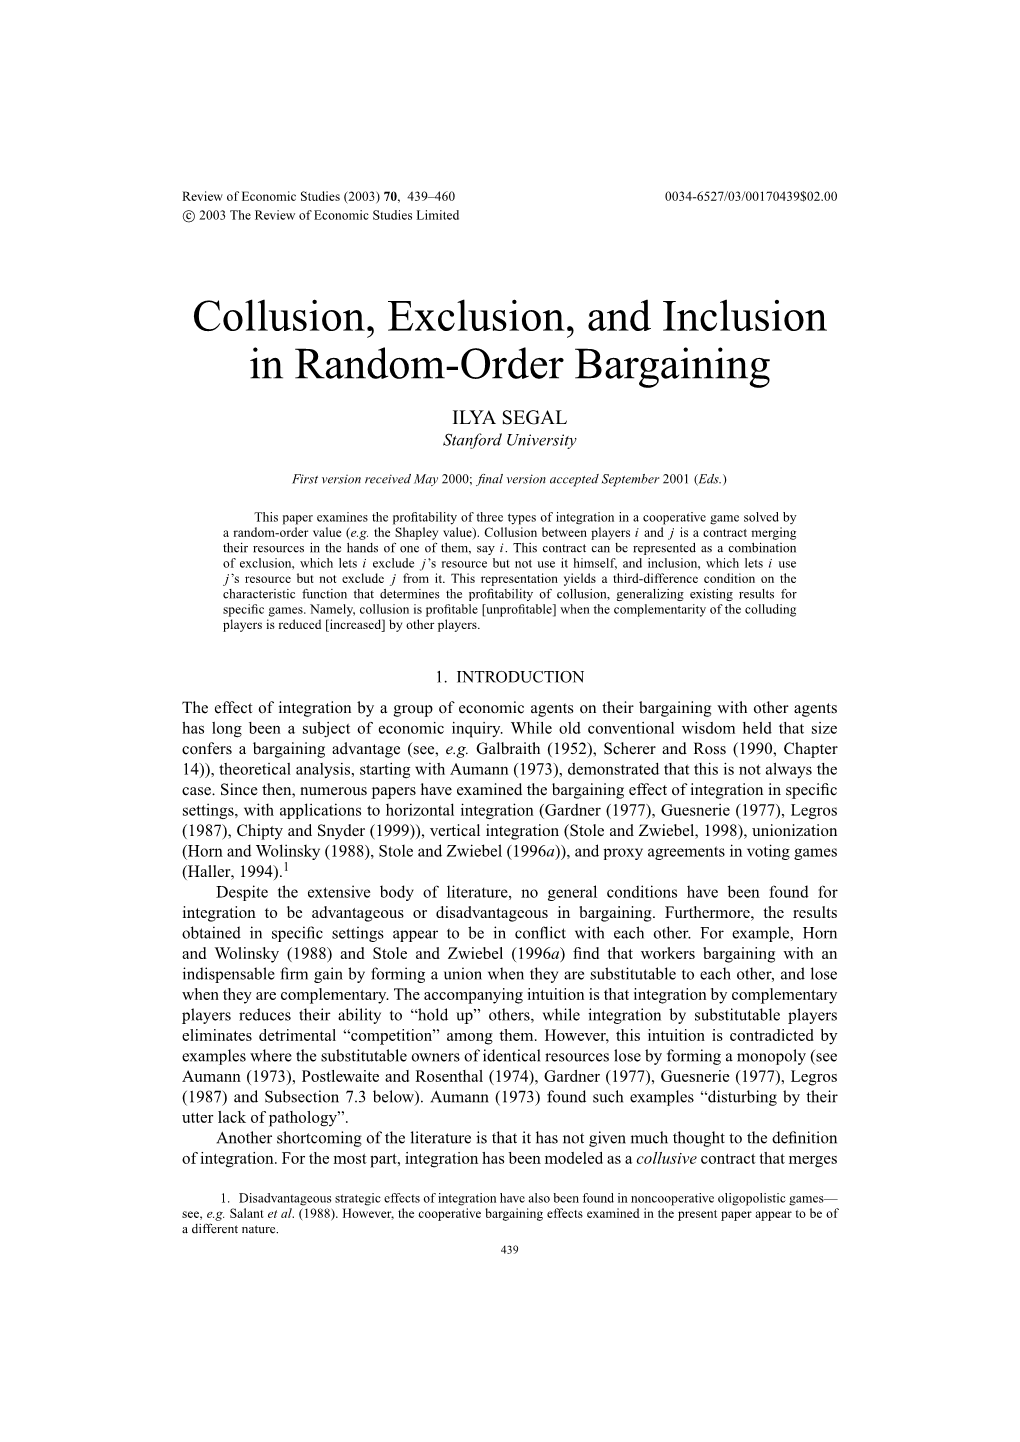 Collusion, Exclusion, and Inclusion in Random-Order Bargaining ILYA SEGAL Stanford University